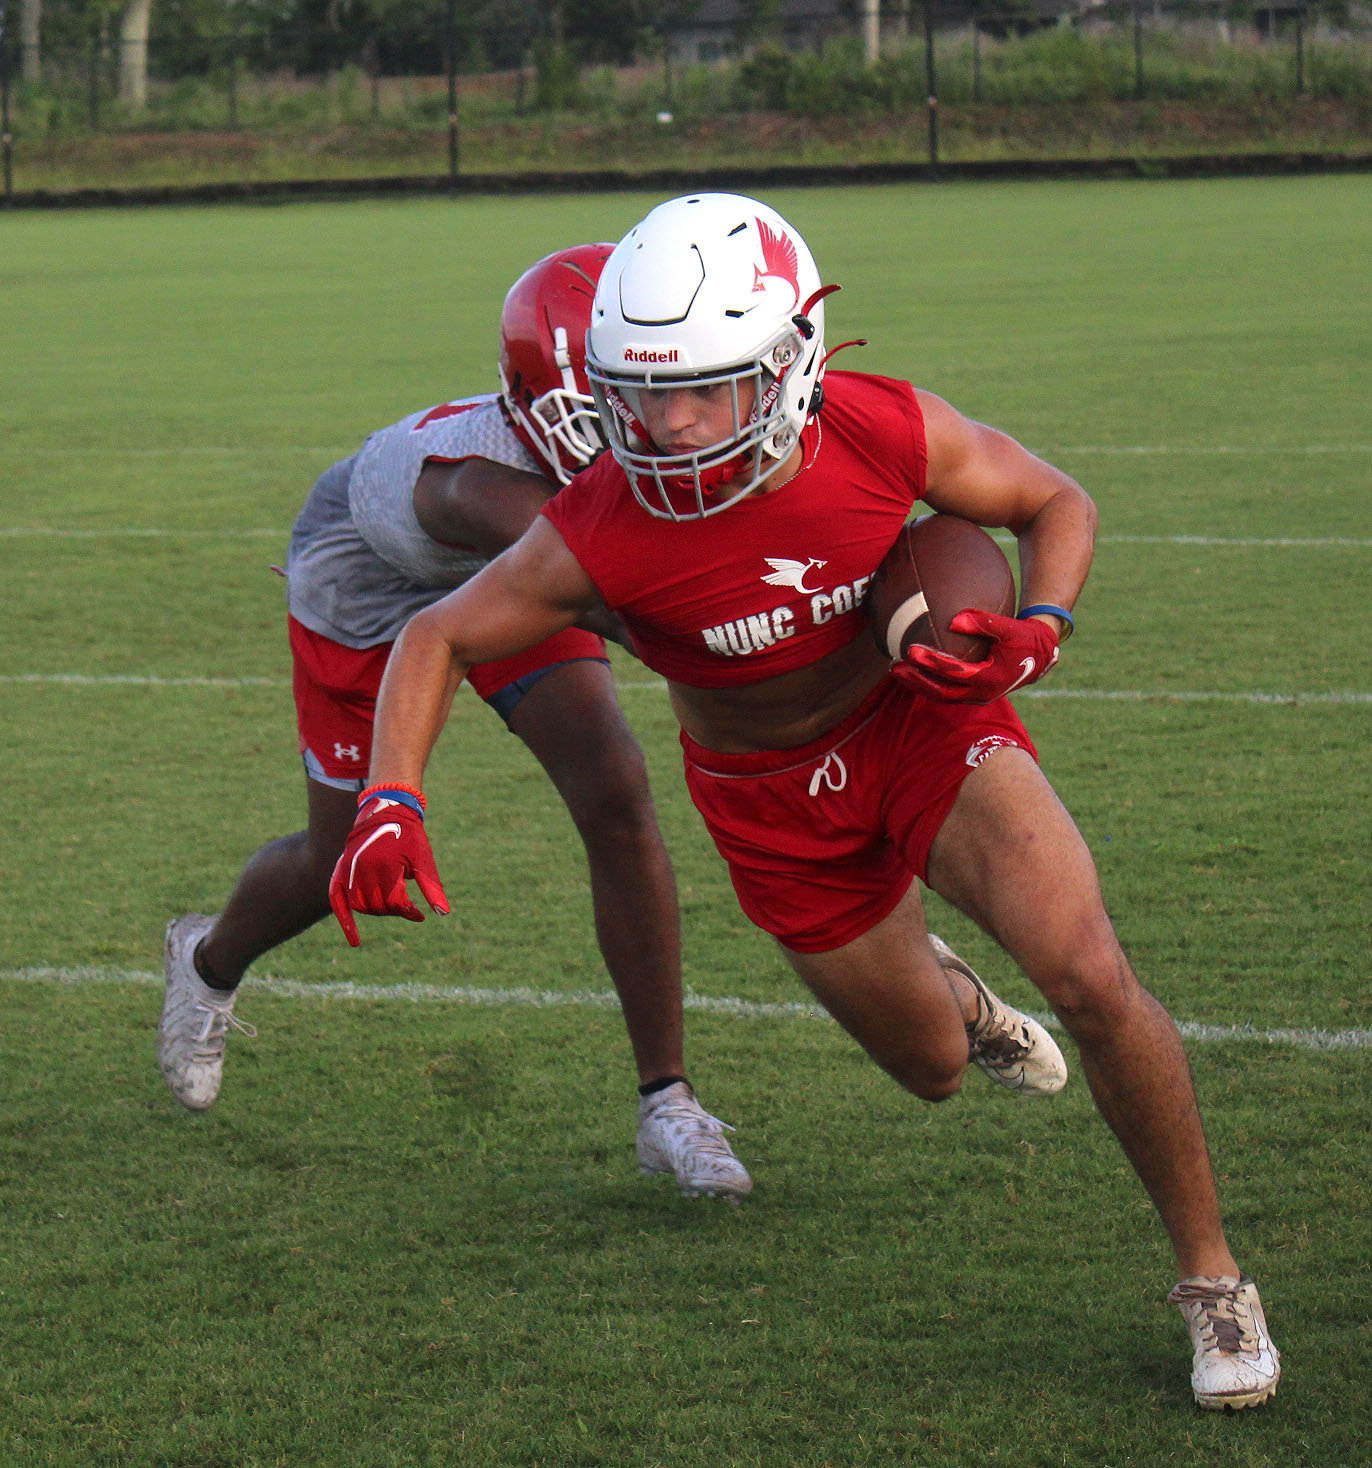 The St. Michael Catholic Cardinals will keep their focus on Region 1 according to head coach Philip Rivers. St. Michael competed against Daphne, Hewitt-Trussville and Saraland during day one of competition at the Foley 7-on-7 Showdown.